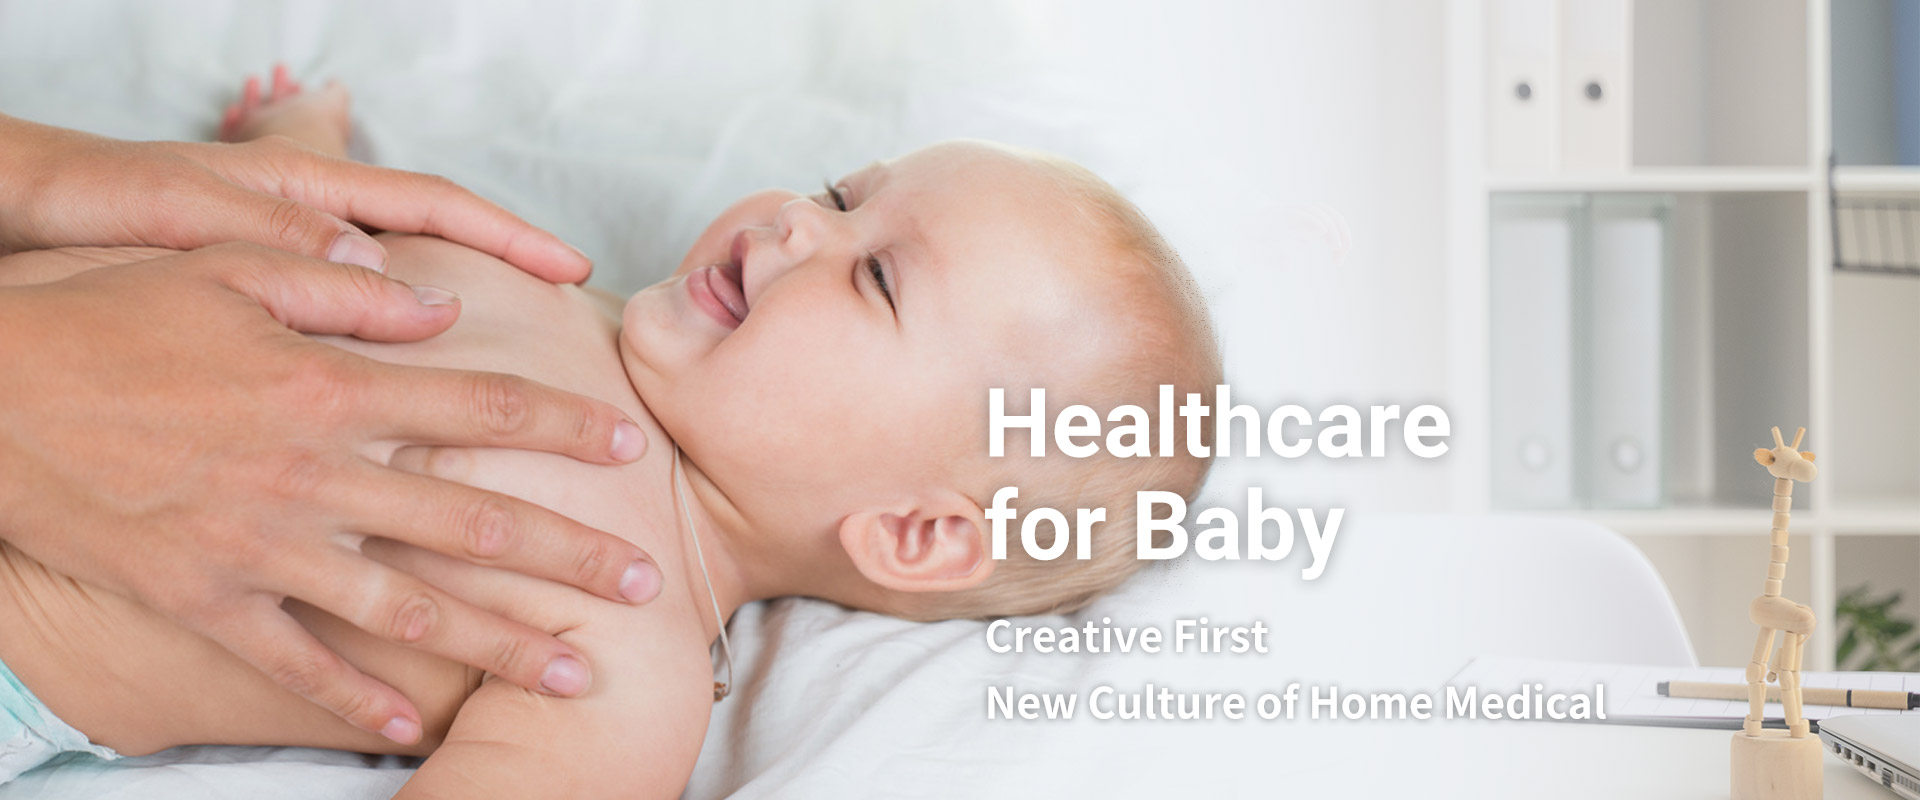 Baby Health Care01